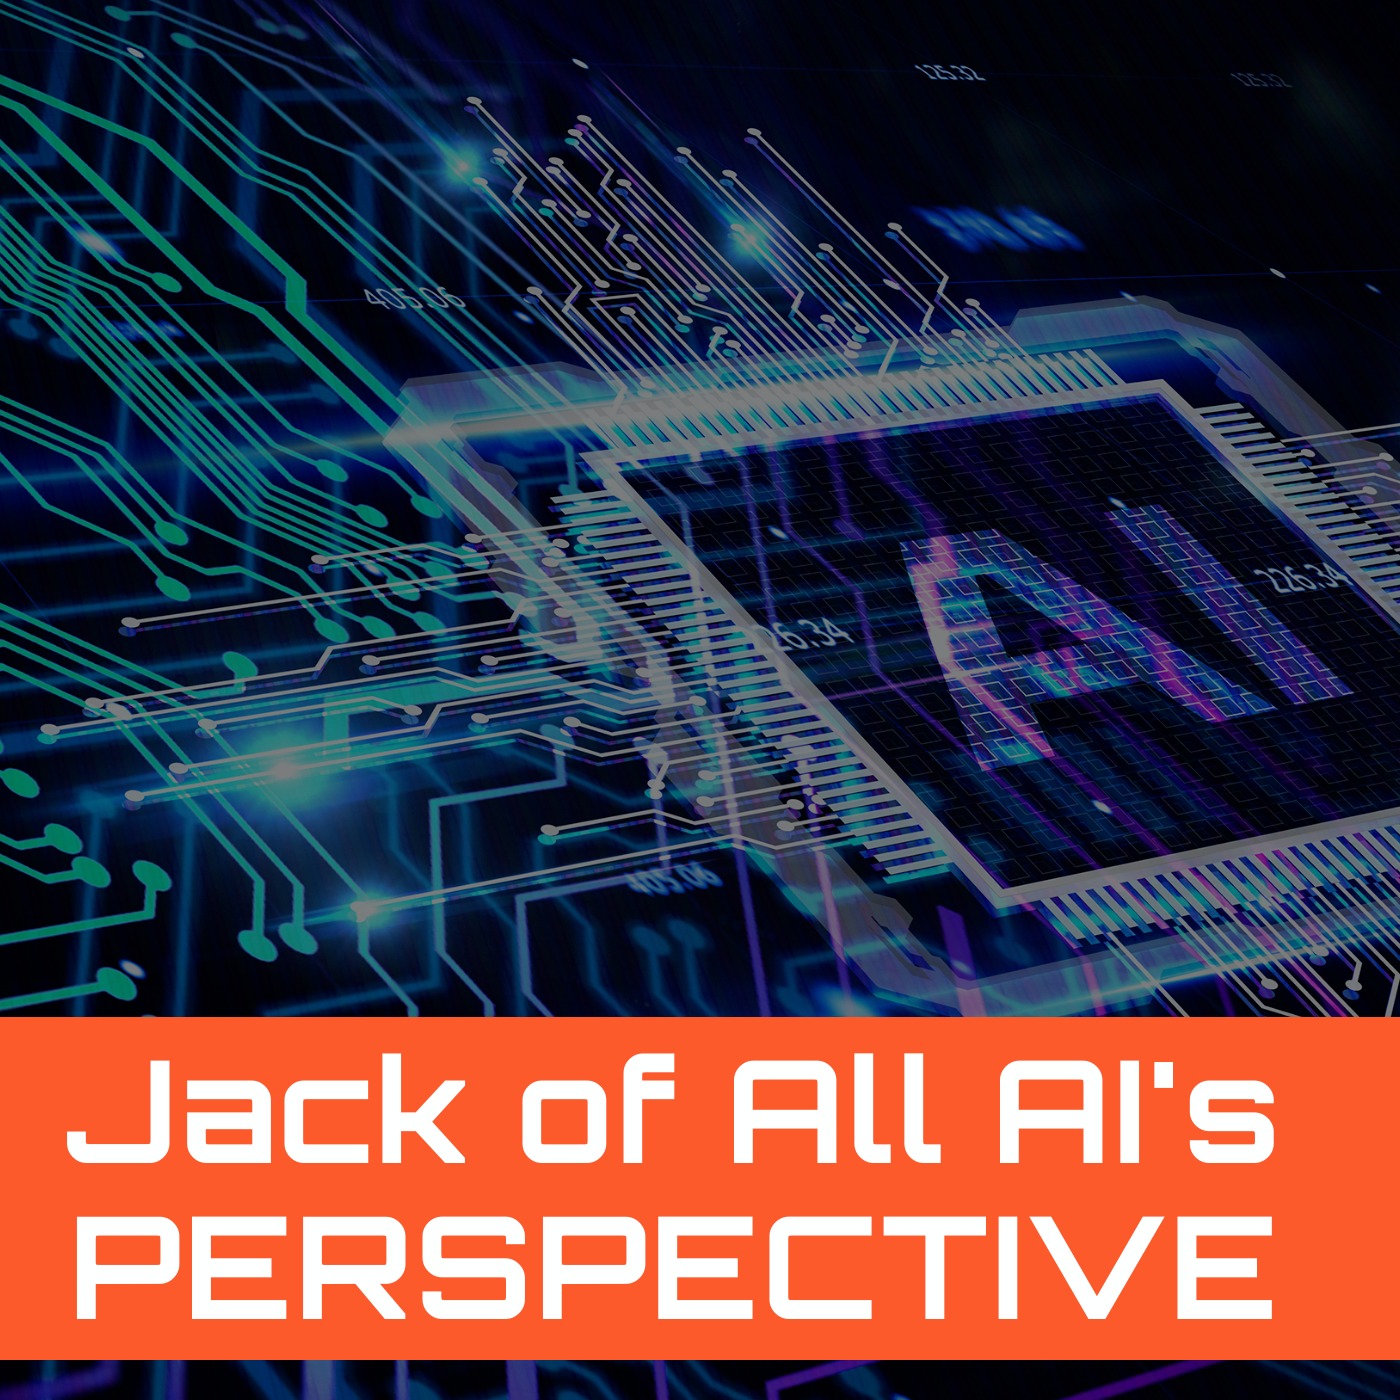 Jack of All AI's Perspective - Podcast - EPISODE 7 - THE INTERSECTION OF DATA SCIENCE AND DATA pt1